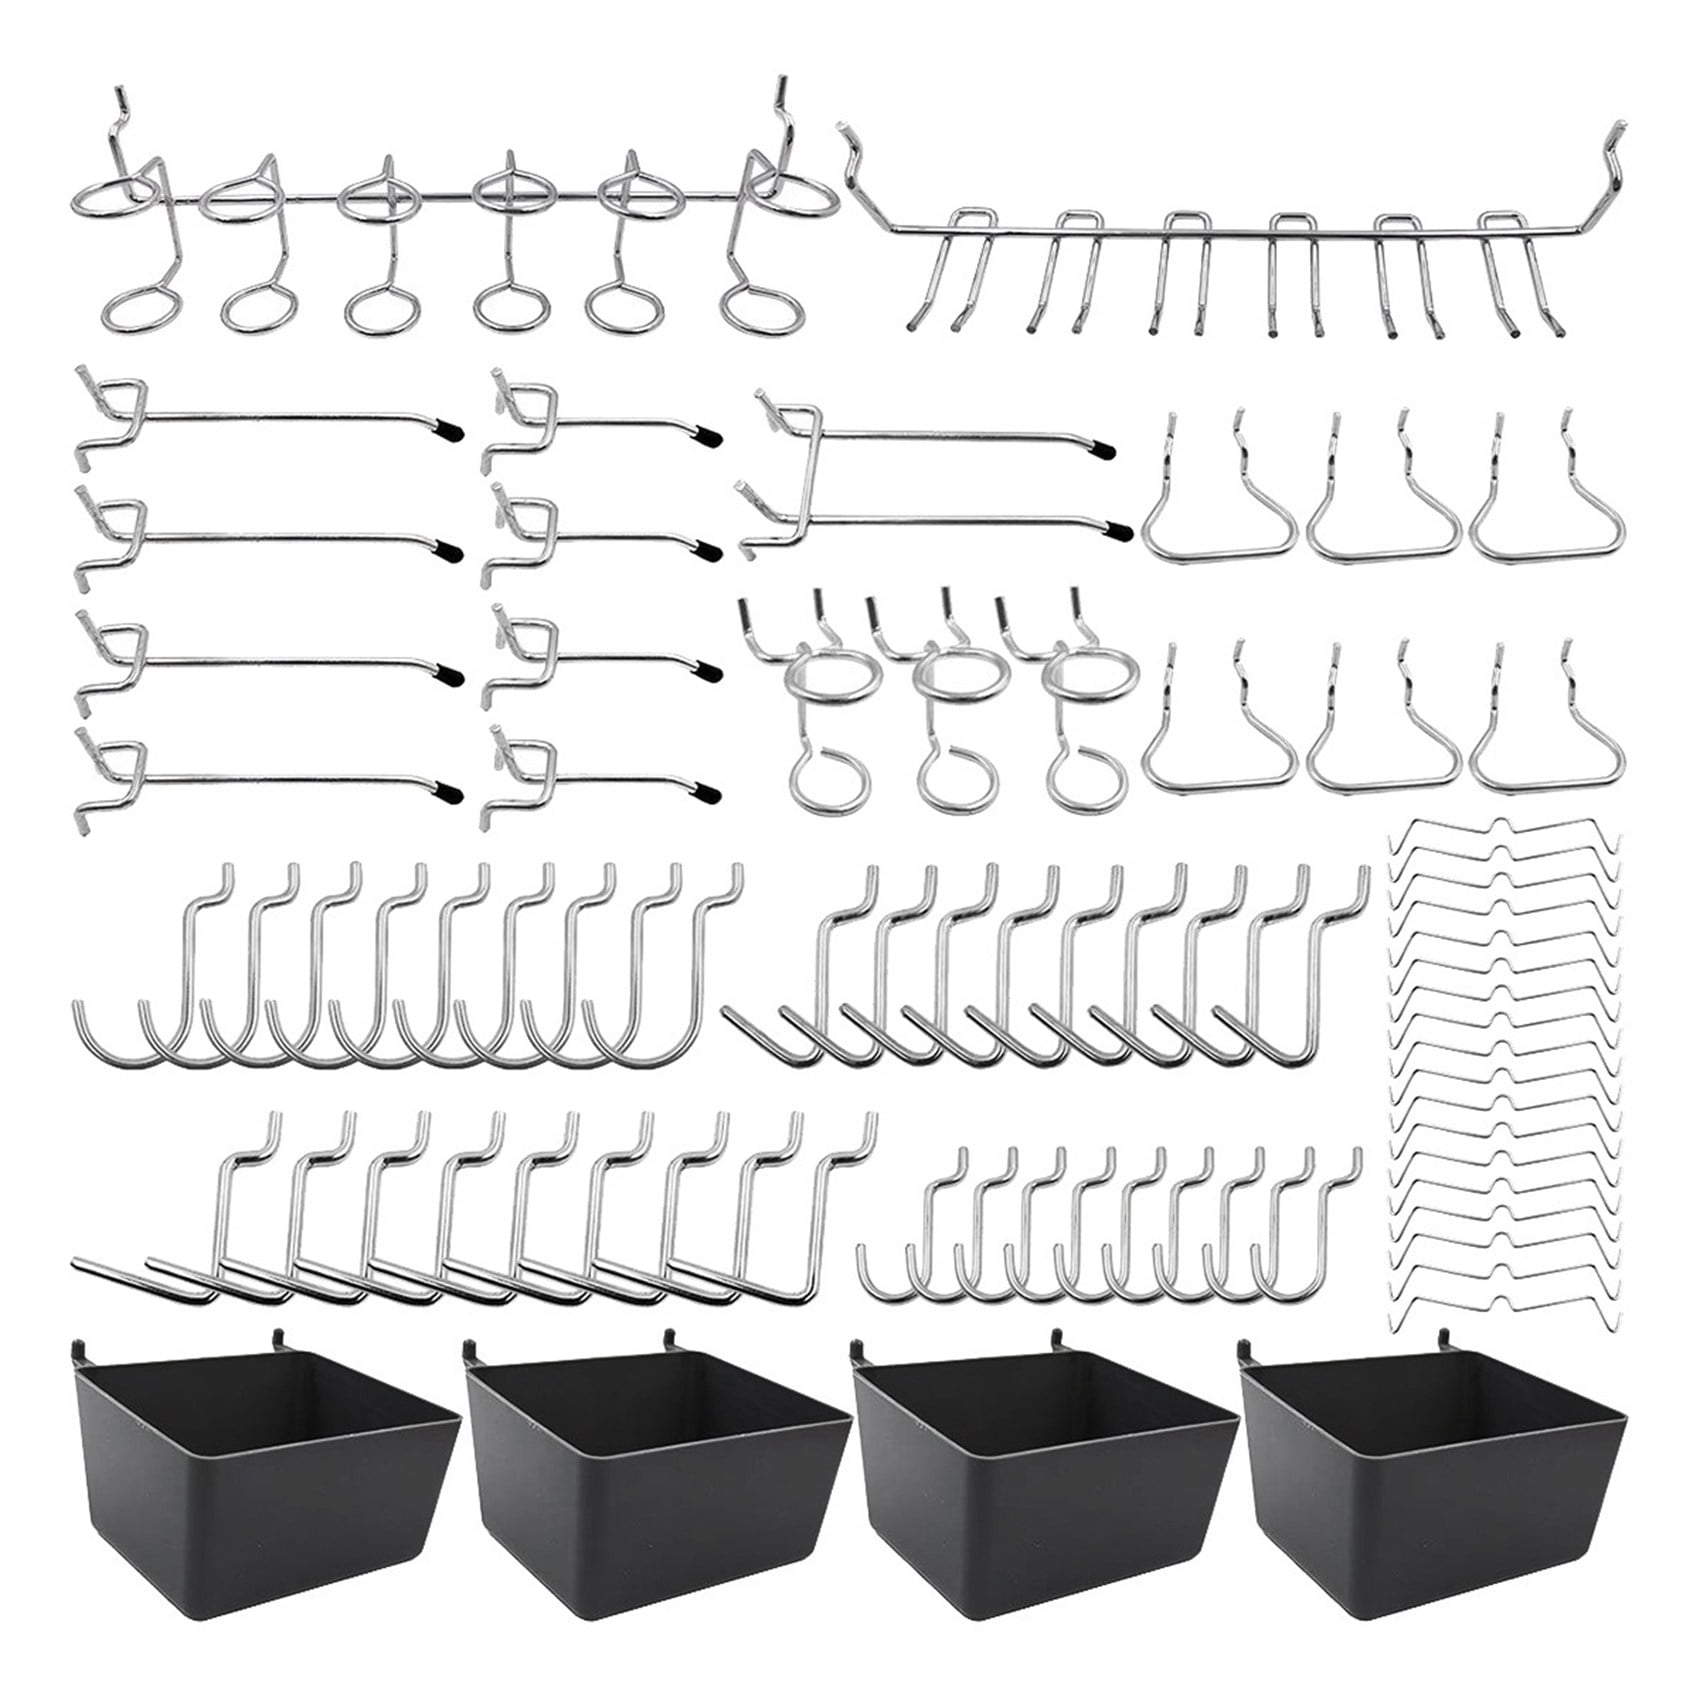 Details about   80 Piece Pegboard Hooks Assortment with Pegboard Bins Peg Locks for OrganiH8B6 